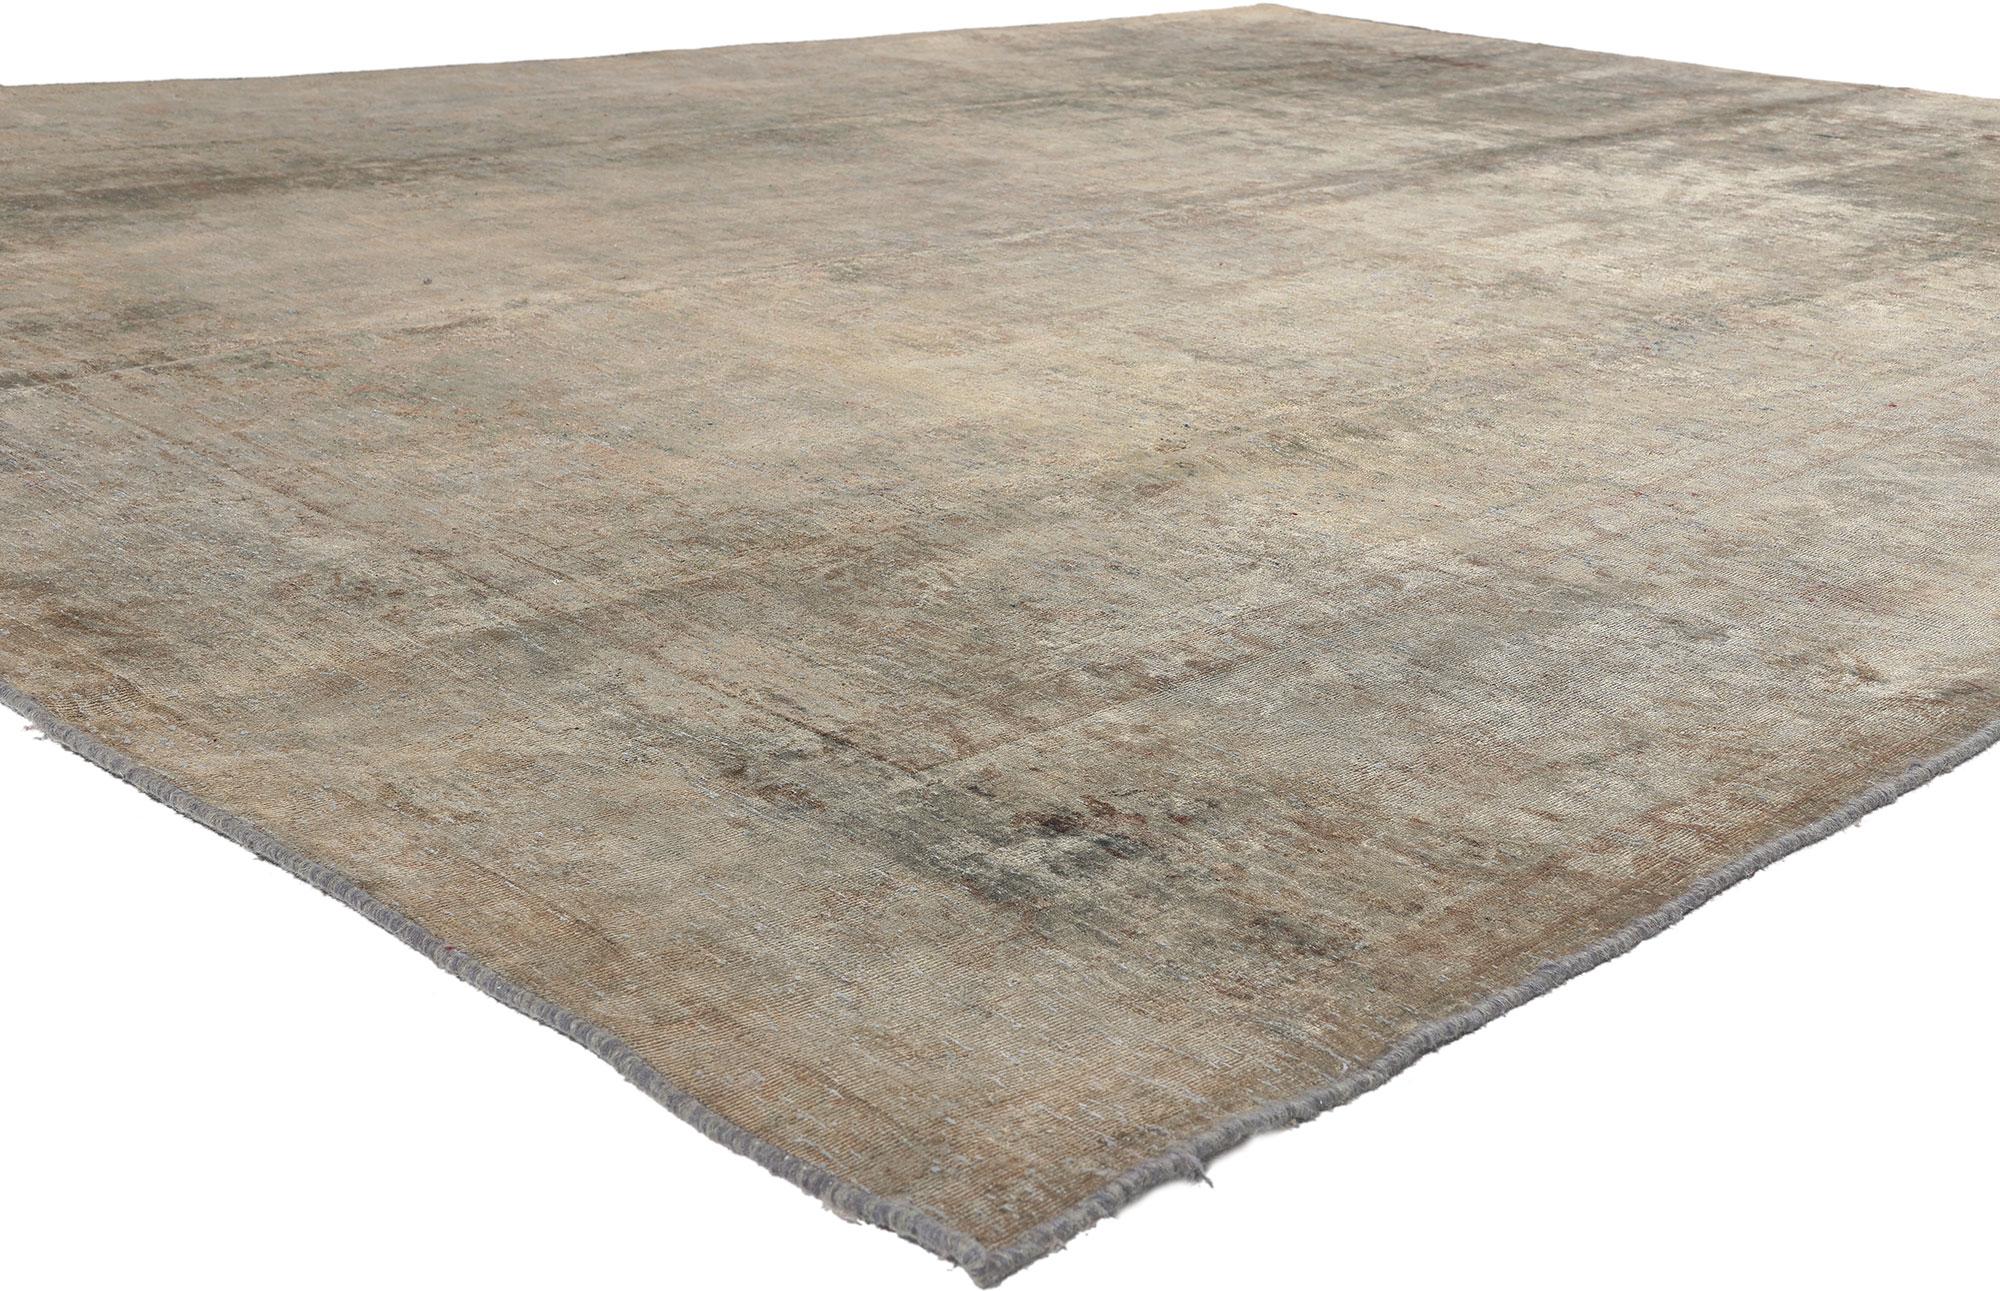 60611 Vintage Turkish Overdyed Rug, 09'08 x 12'08. 
​Step into a realm where Modern Industrial flirts effortlessly with luxe utilitarian charm, embodied in the threads of this hand-knotted wool vintage Turkish overdyed rug. Let's dissect the styles